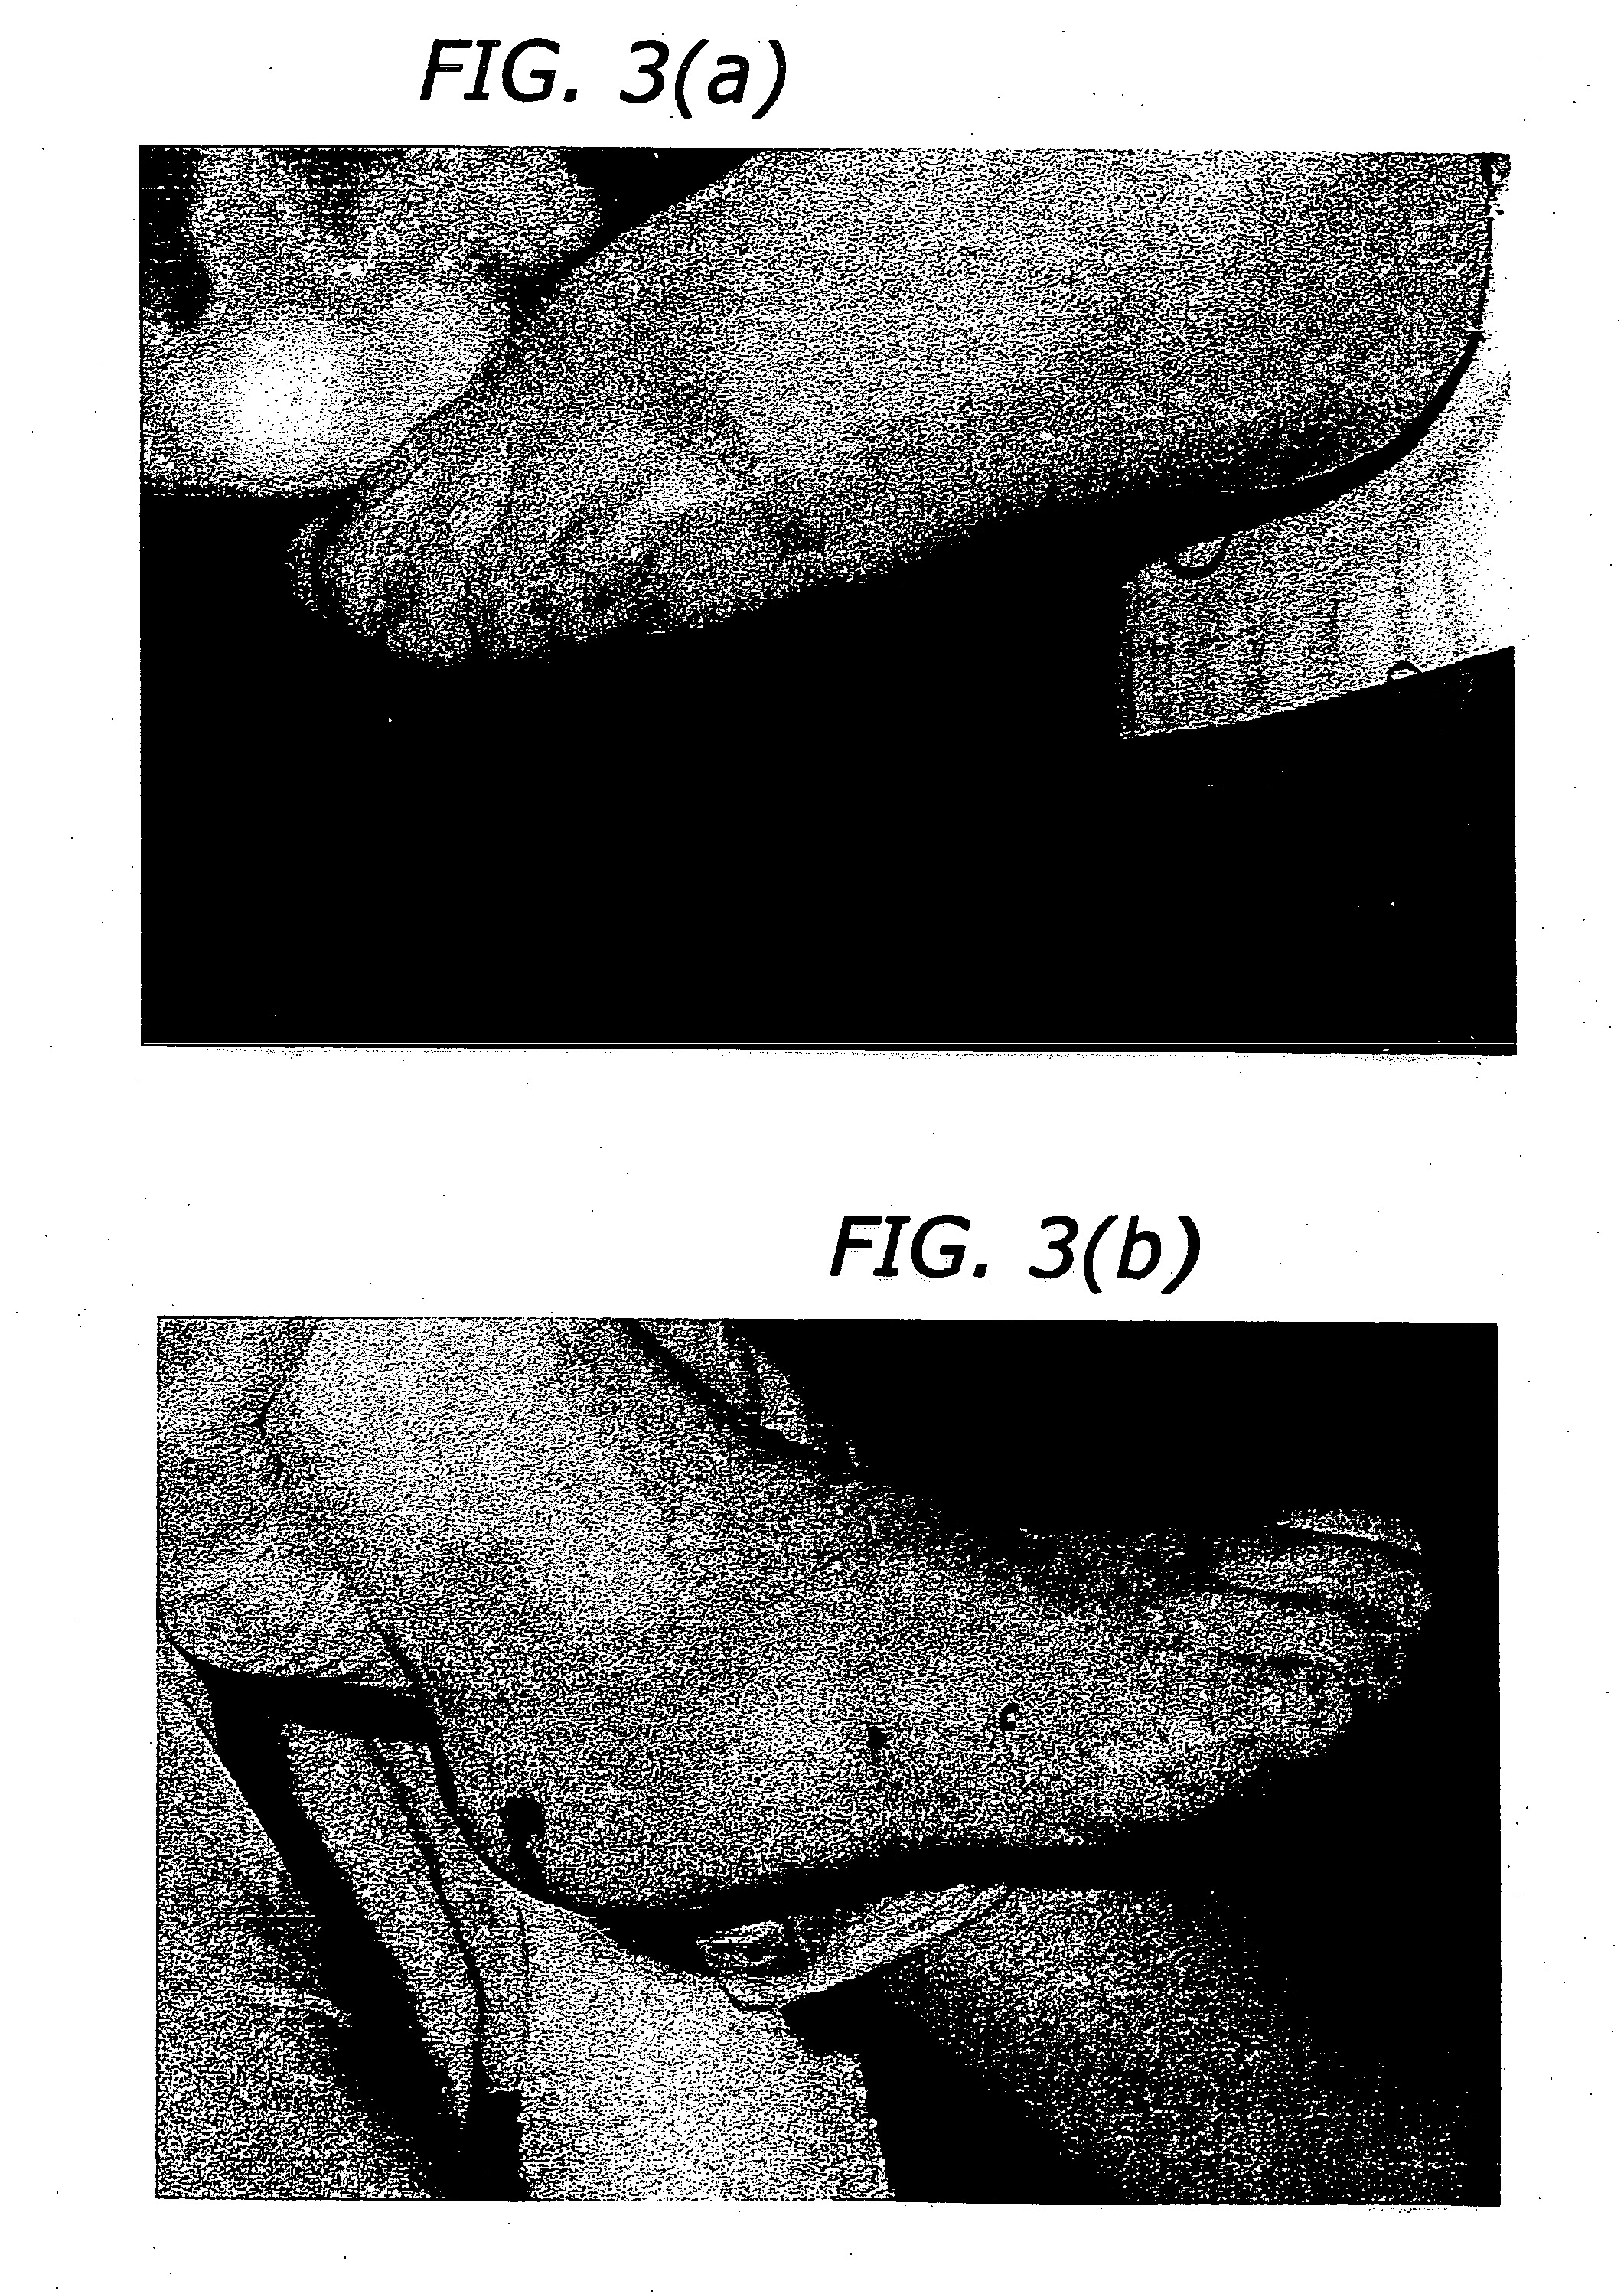 Methods for treatment of inflammatory diseases